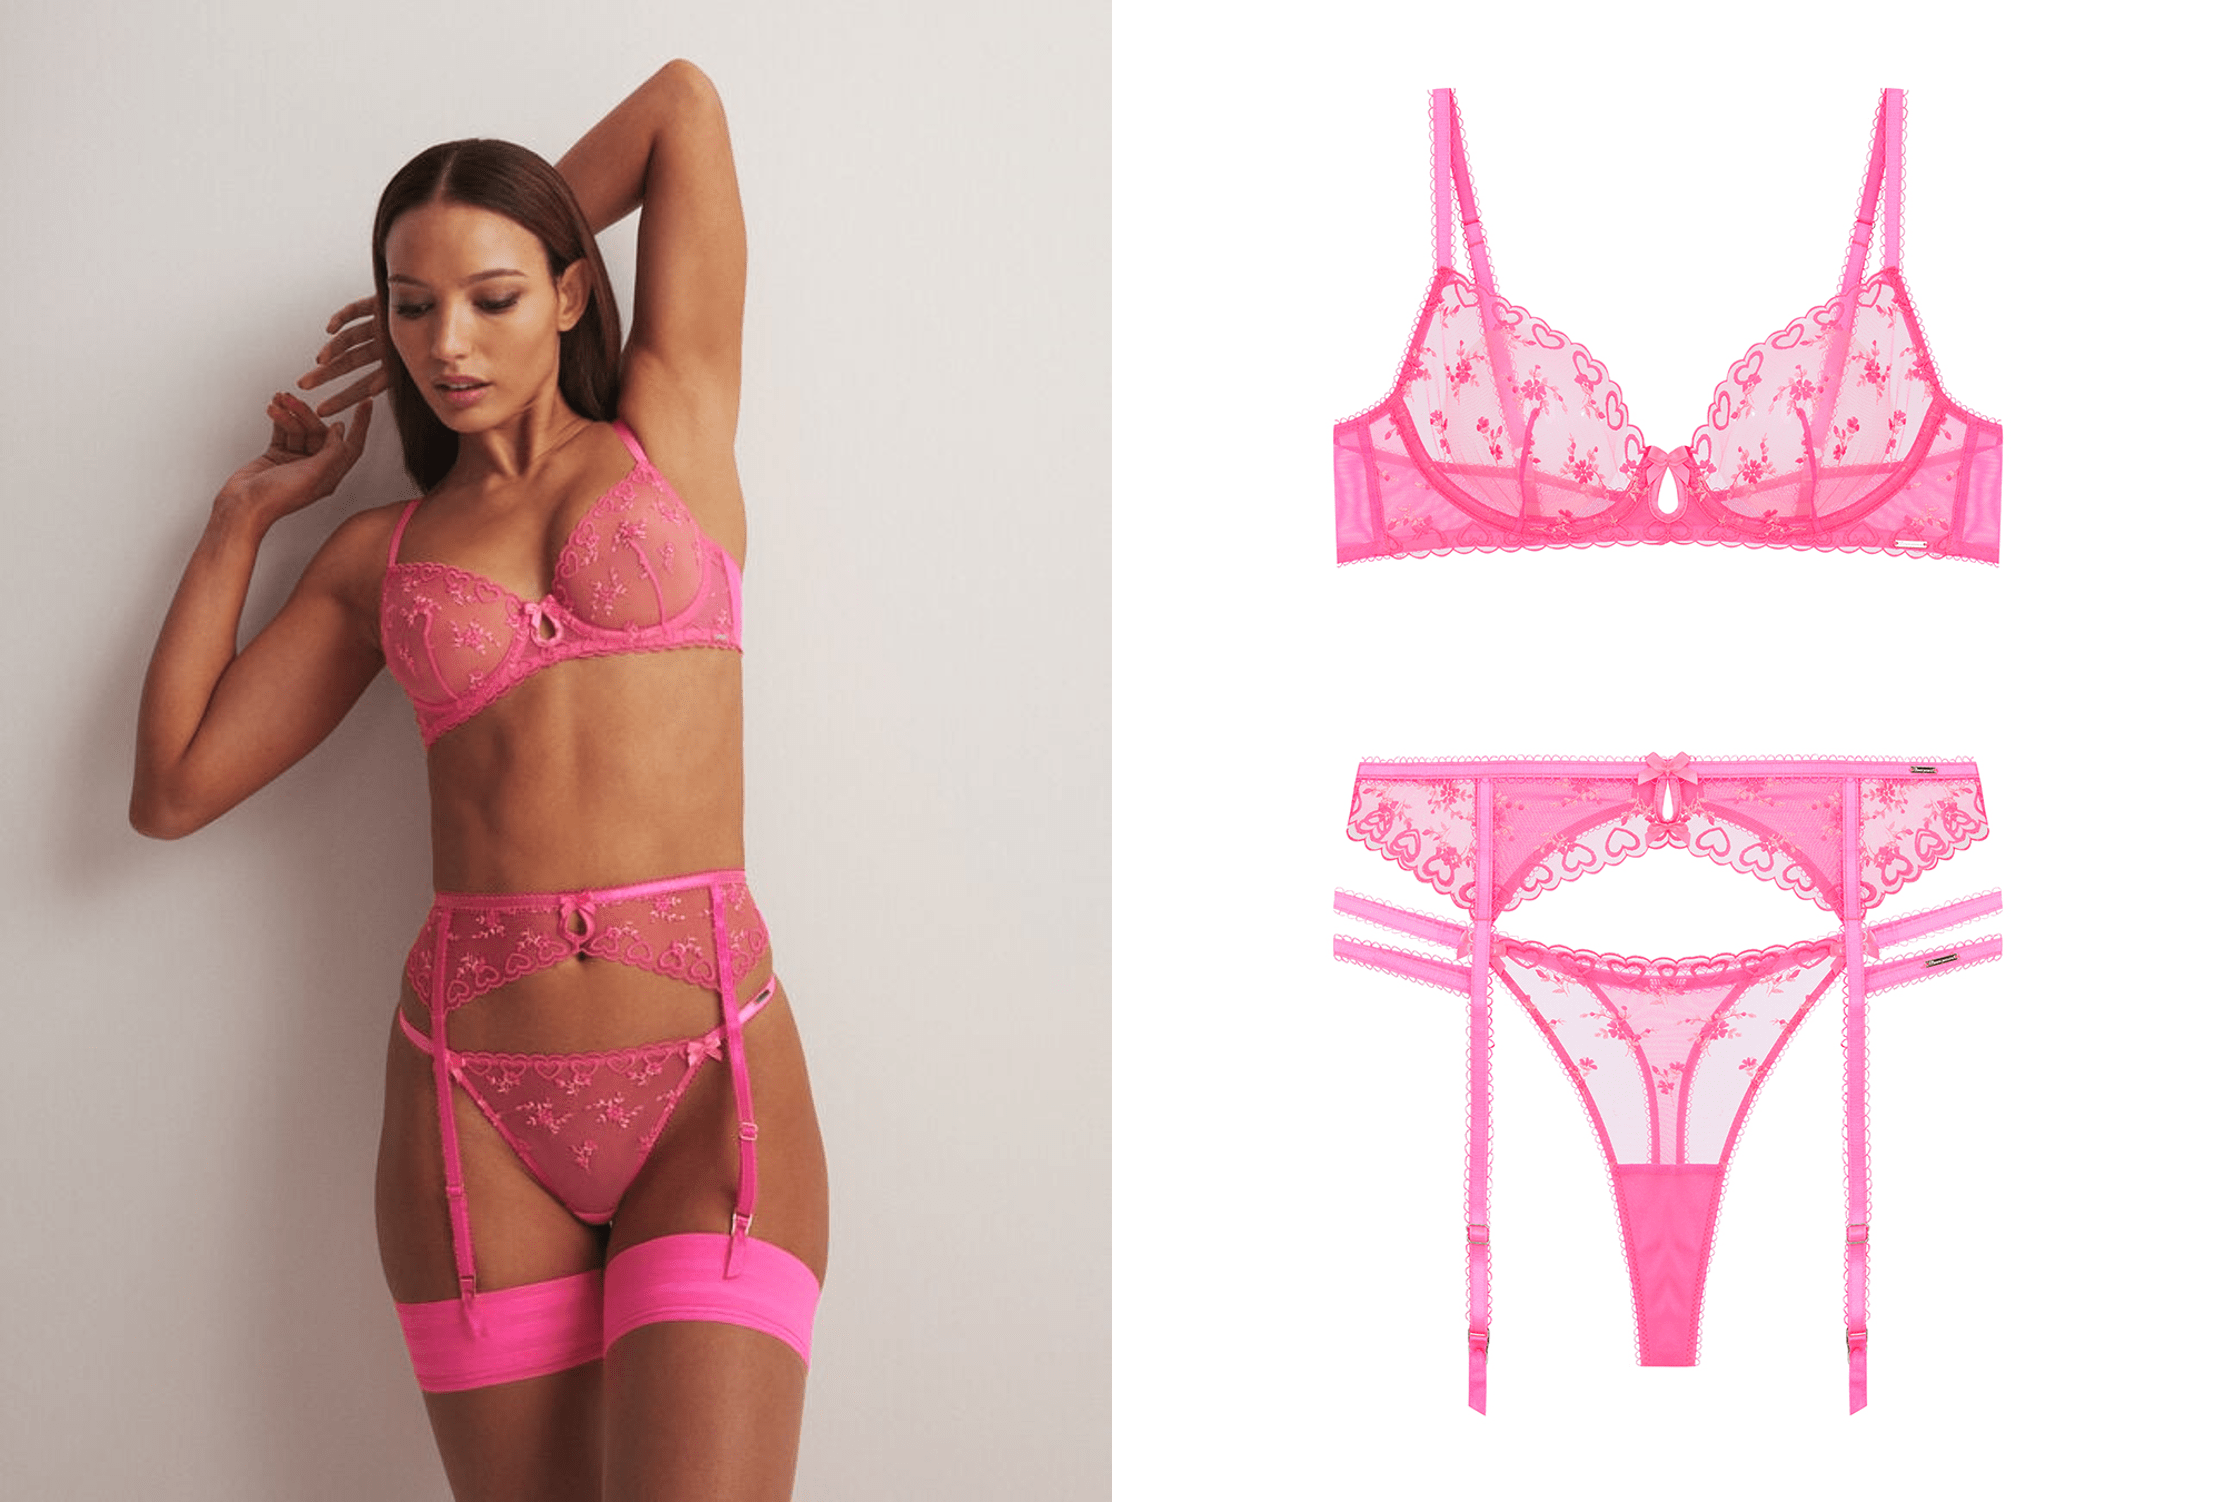 Self Love Gifts, Lingerie Gifts for You